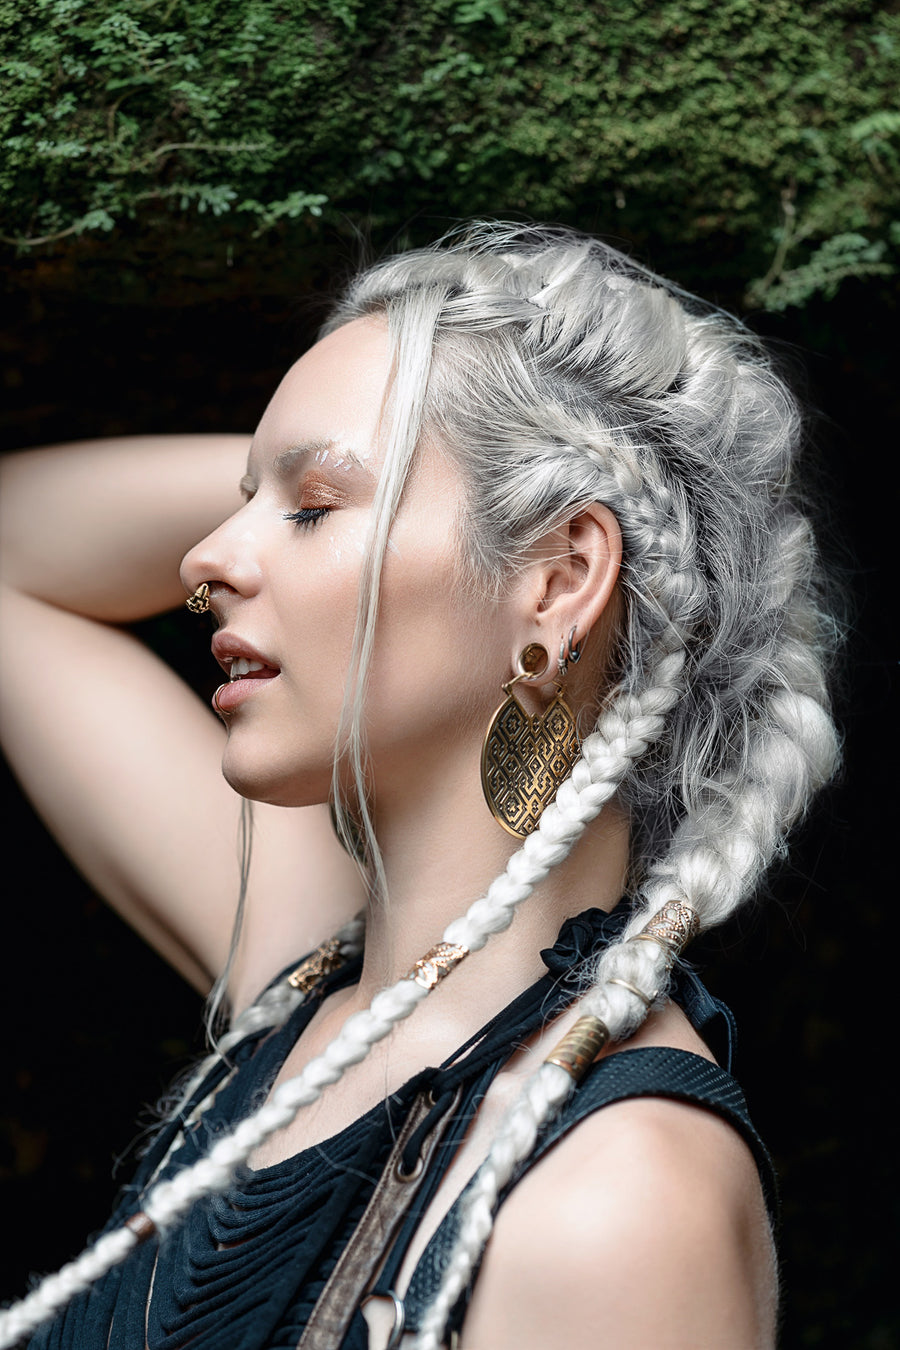 A serene profile of a woman with silver braided hair, exuding a bohemian vibe with her large, patterned, gold earrings. A sense of quiet confidence is conveyed through her closed eyes and the gentle placement of her hand on her head, as she stands against a natural backdrop that softly blurs into the distance.